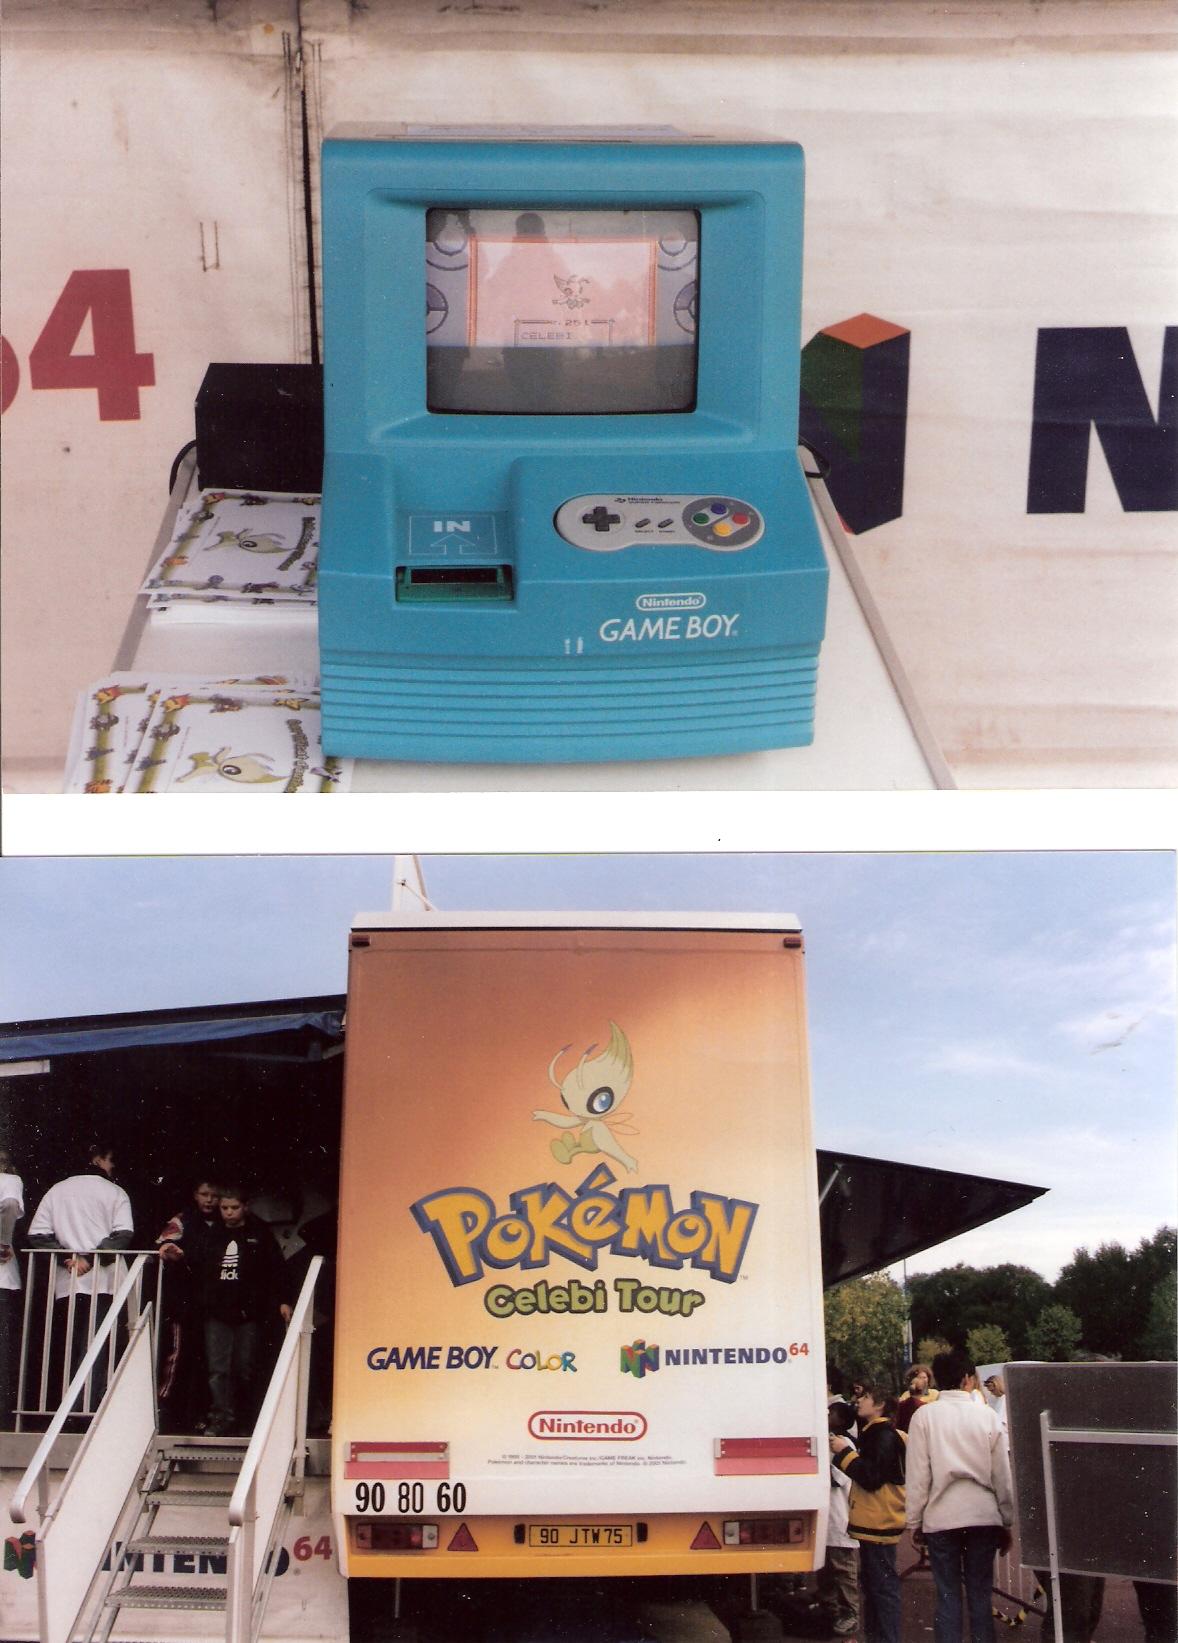  The machine in question, giving out Celebi for pokemon Gold and Silver.